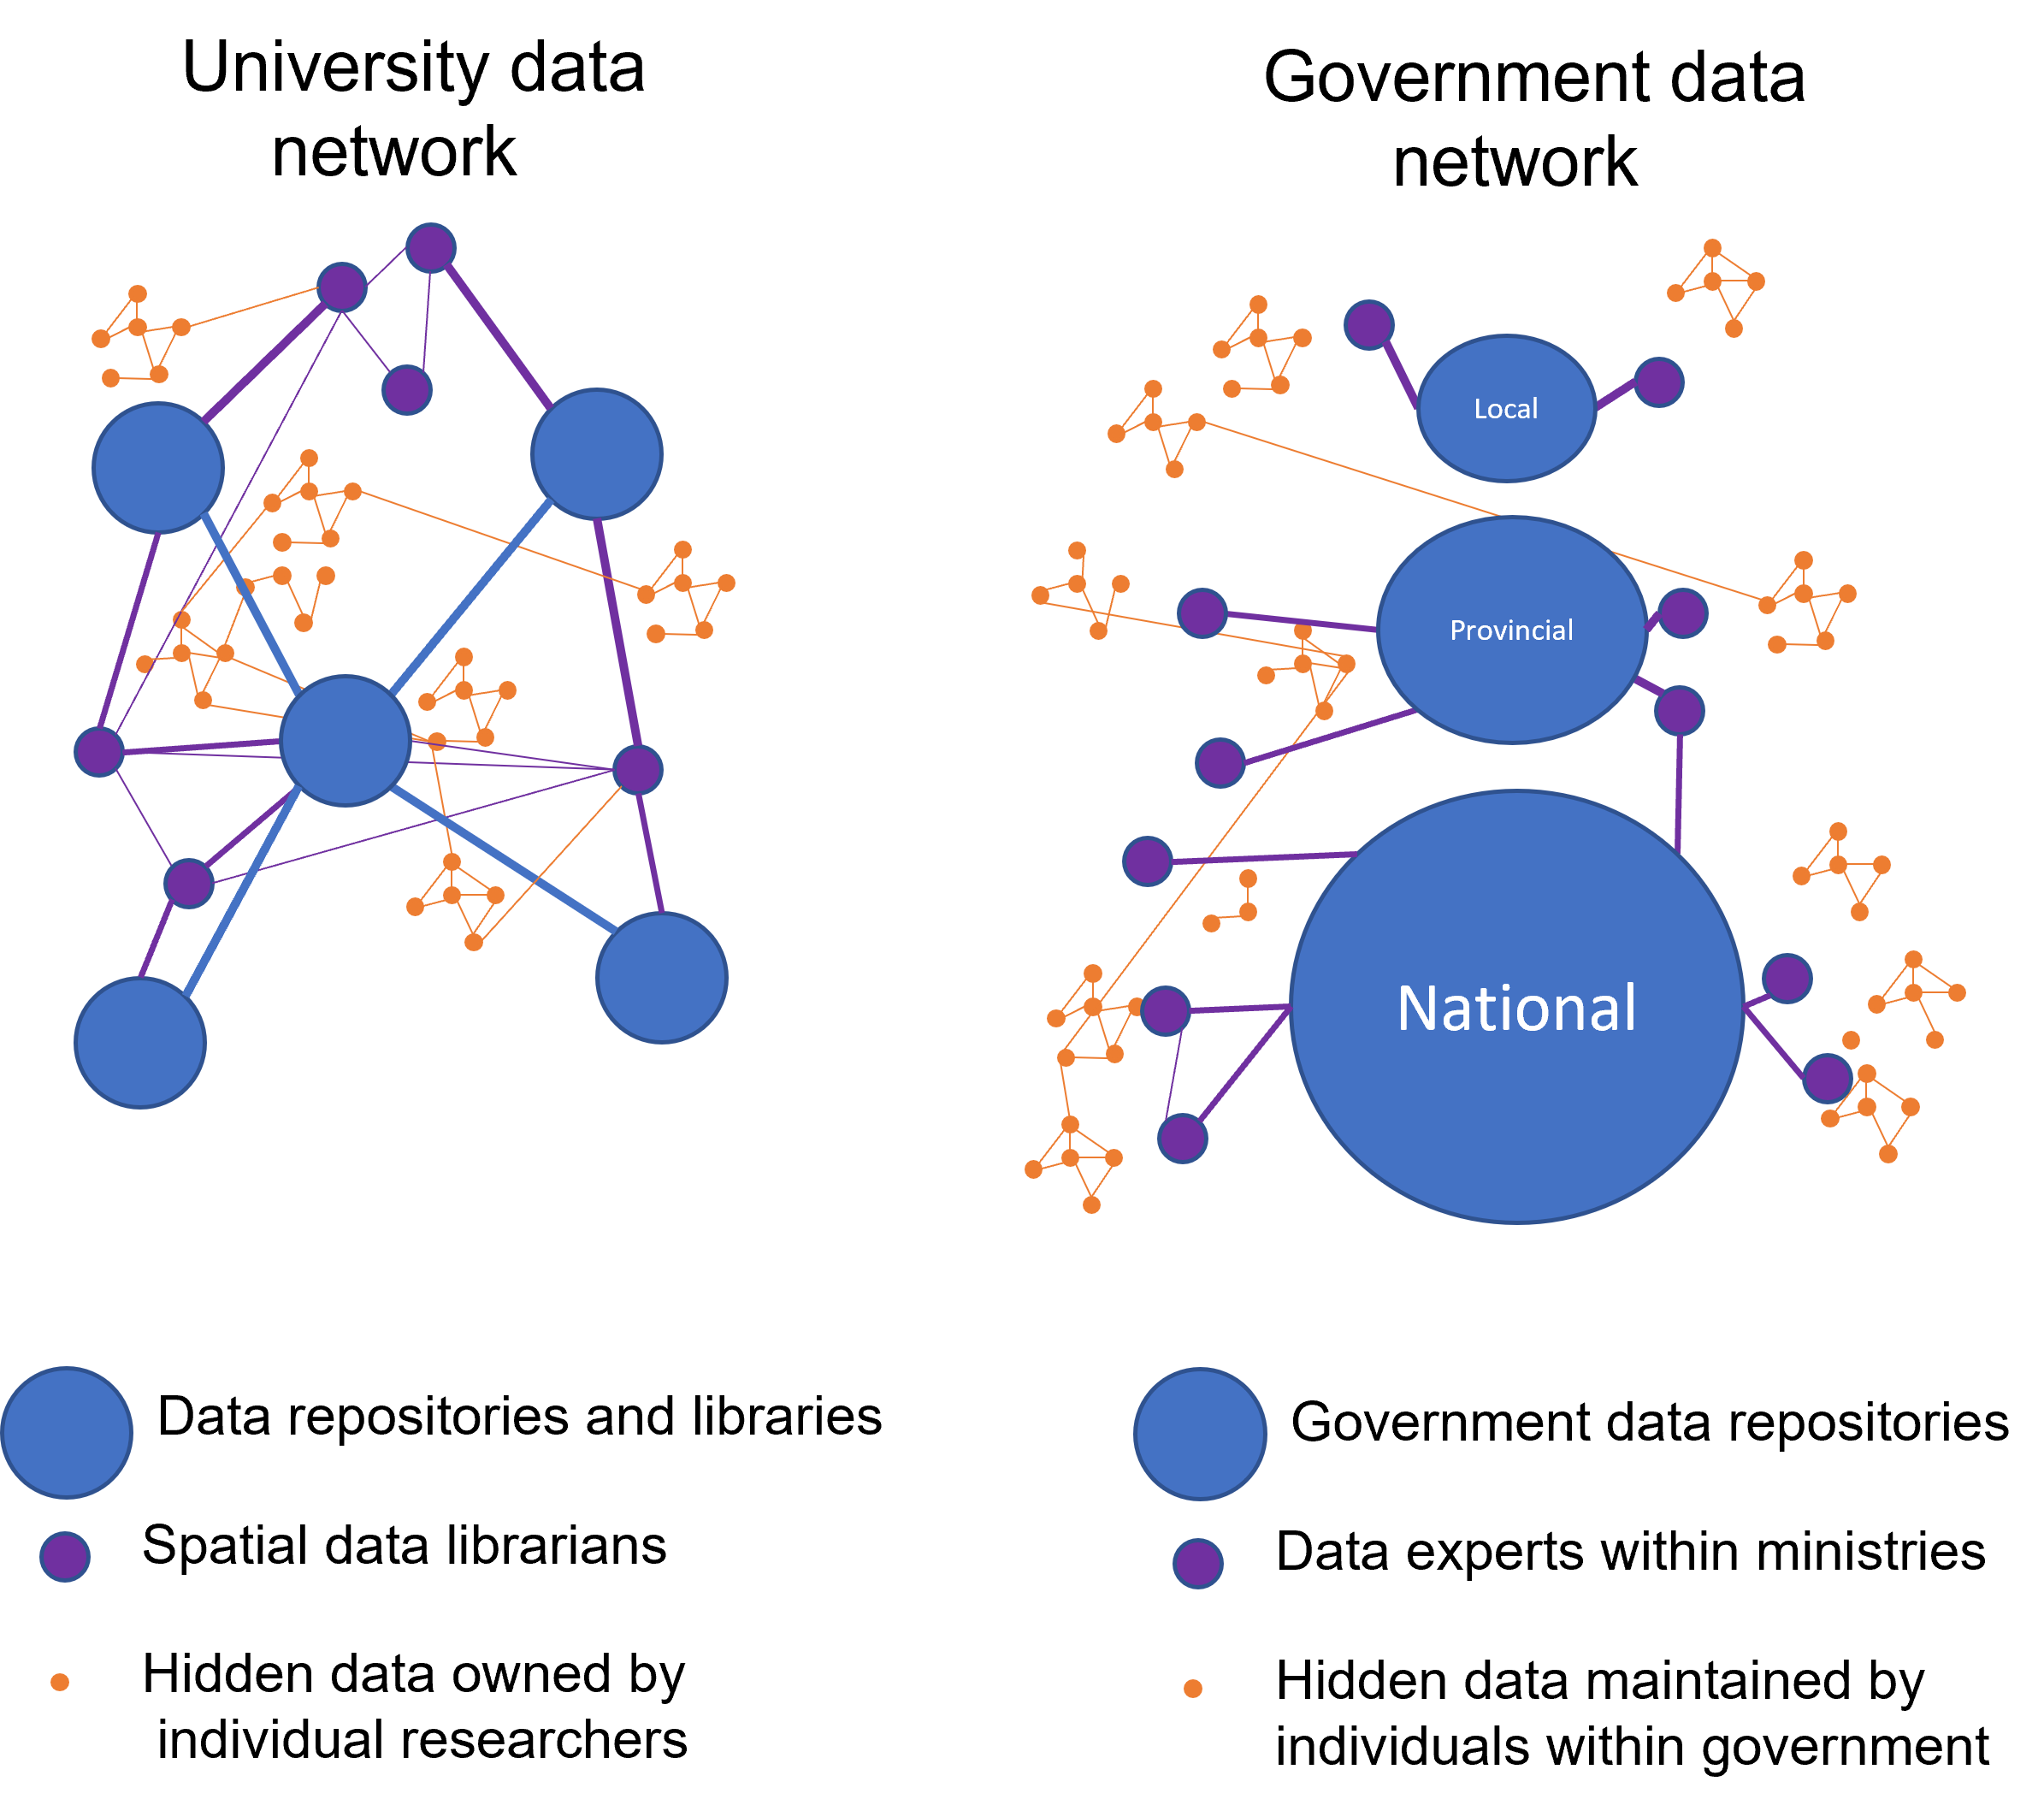 Envisioning university and government data networks. Data within each network is concentrated within data repositories, yet considerable data remains 'hidden' among individual researchers and silos of the Ministry, but can potentially be accessed by finding the right connections. Sutherland, CC-BY-SA-4.0.